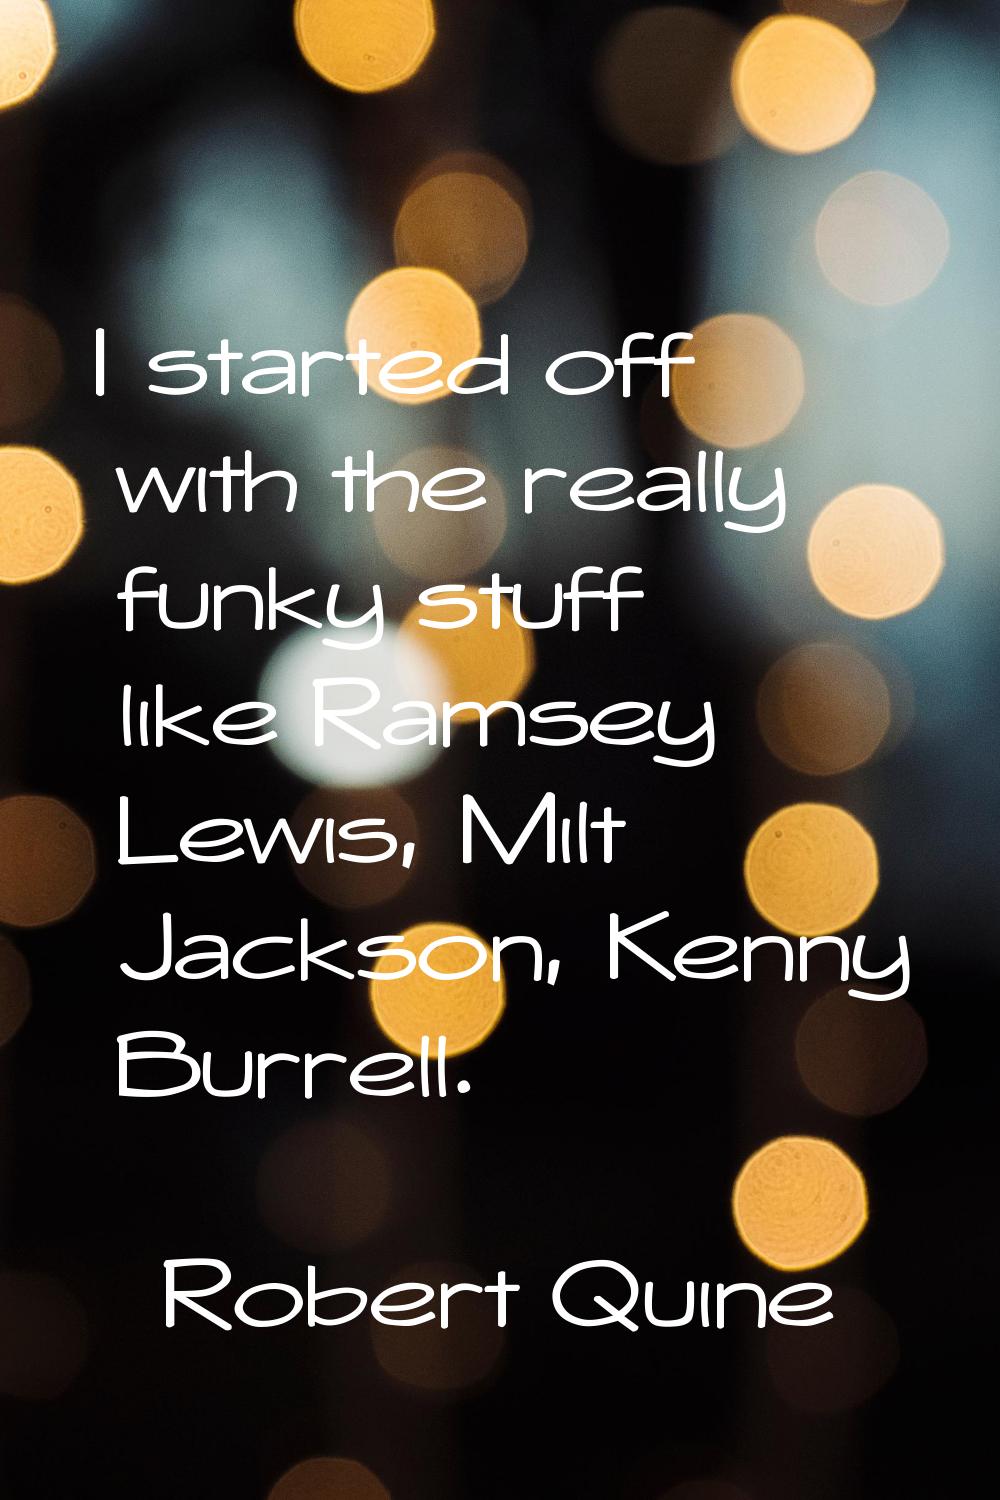 I started off with the really funky stuff like Ramsey Lewis, Milt Jackson, Kenny Burrell.